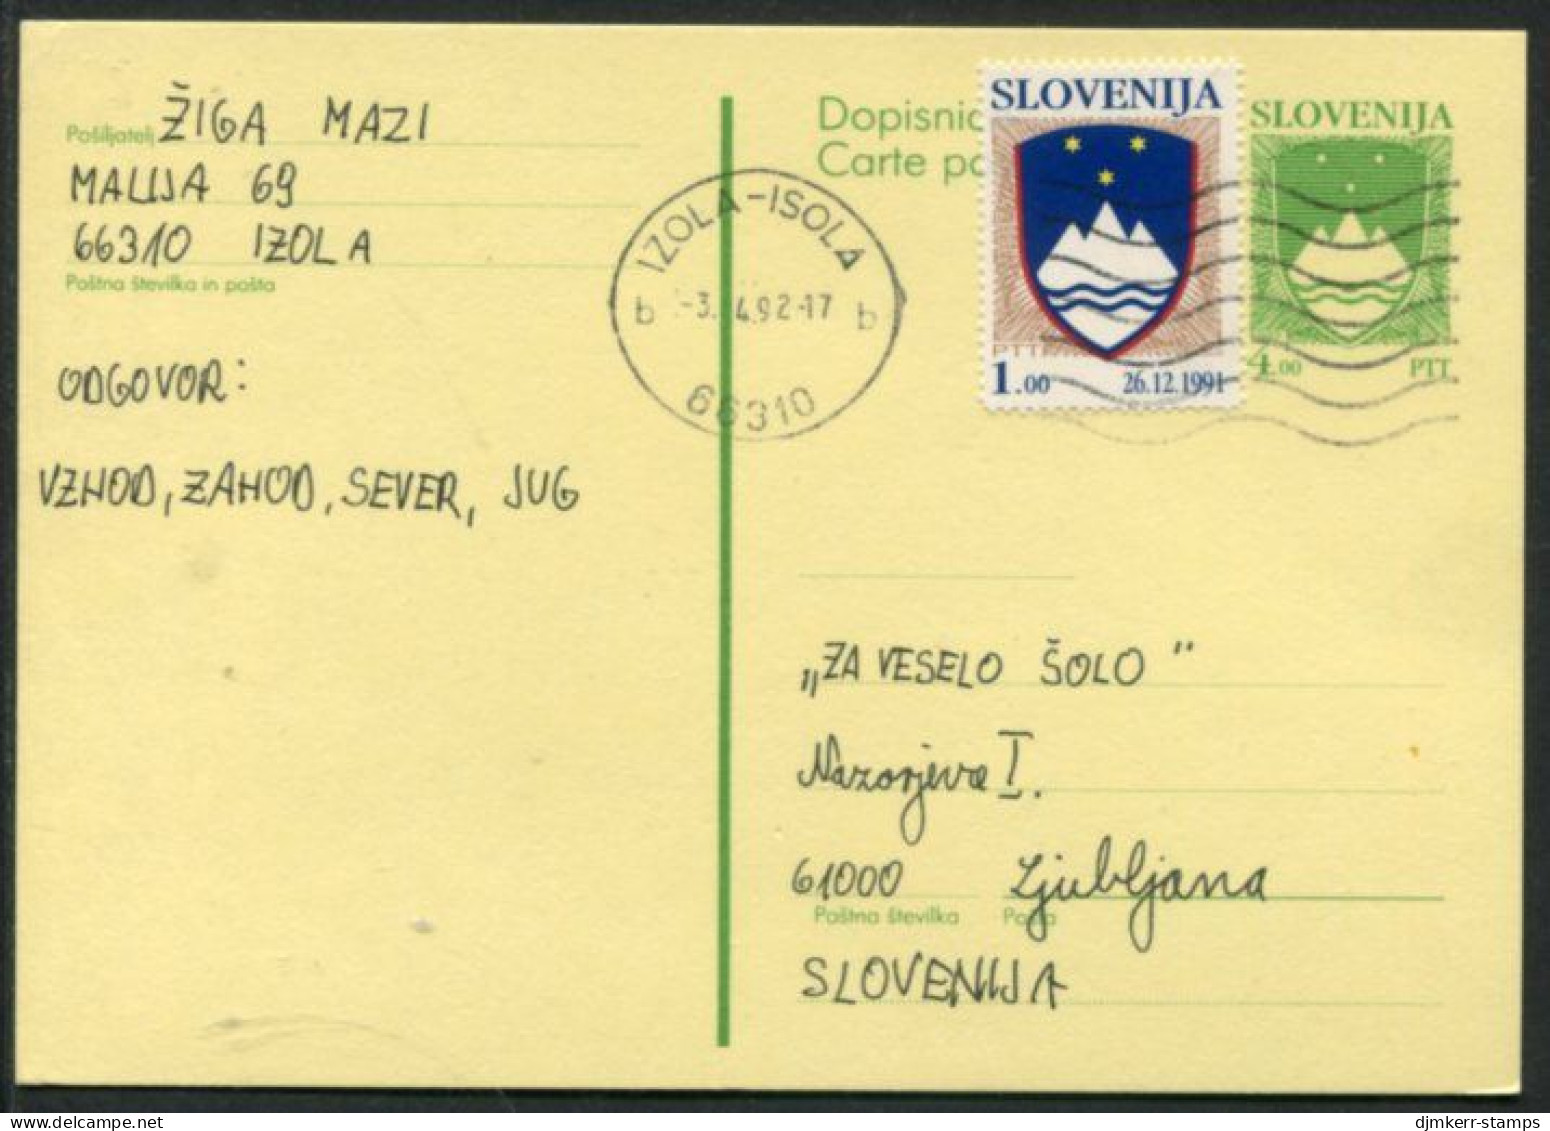 SLOVENIA 1992 4.00 T.  Arms  Stationery Card, Used With Additional 1 T. Stamp.  Michel P1 - Slovenië